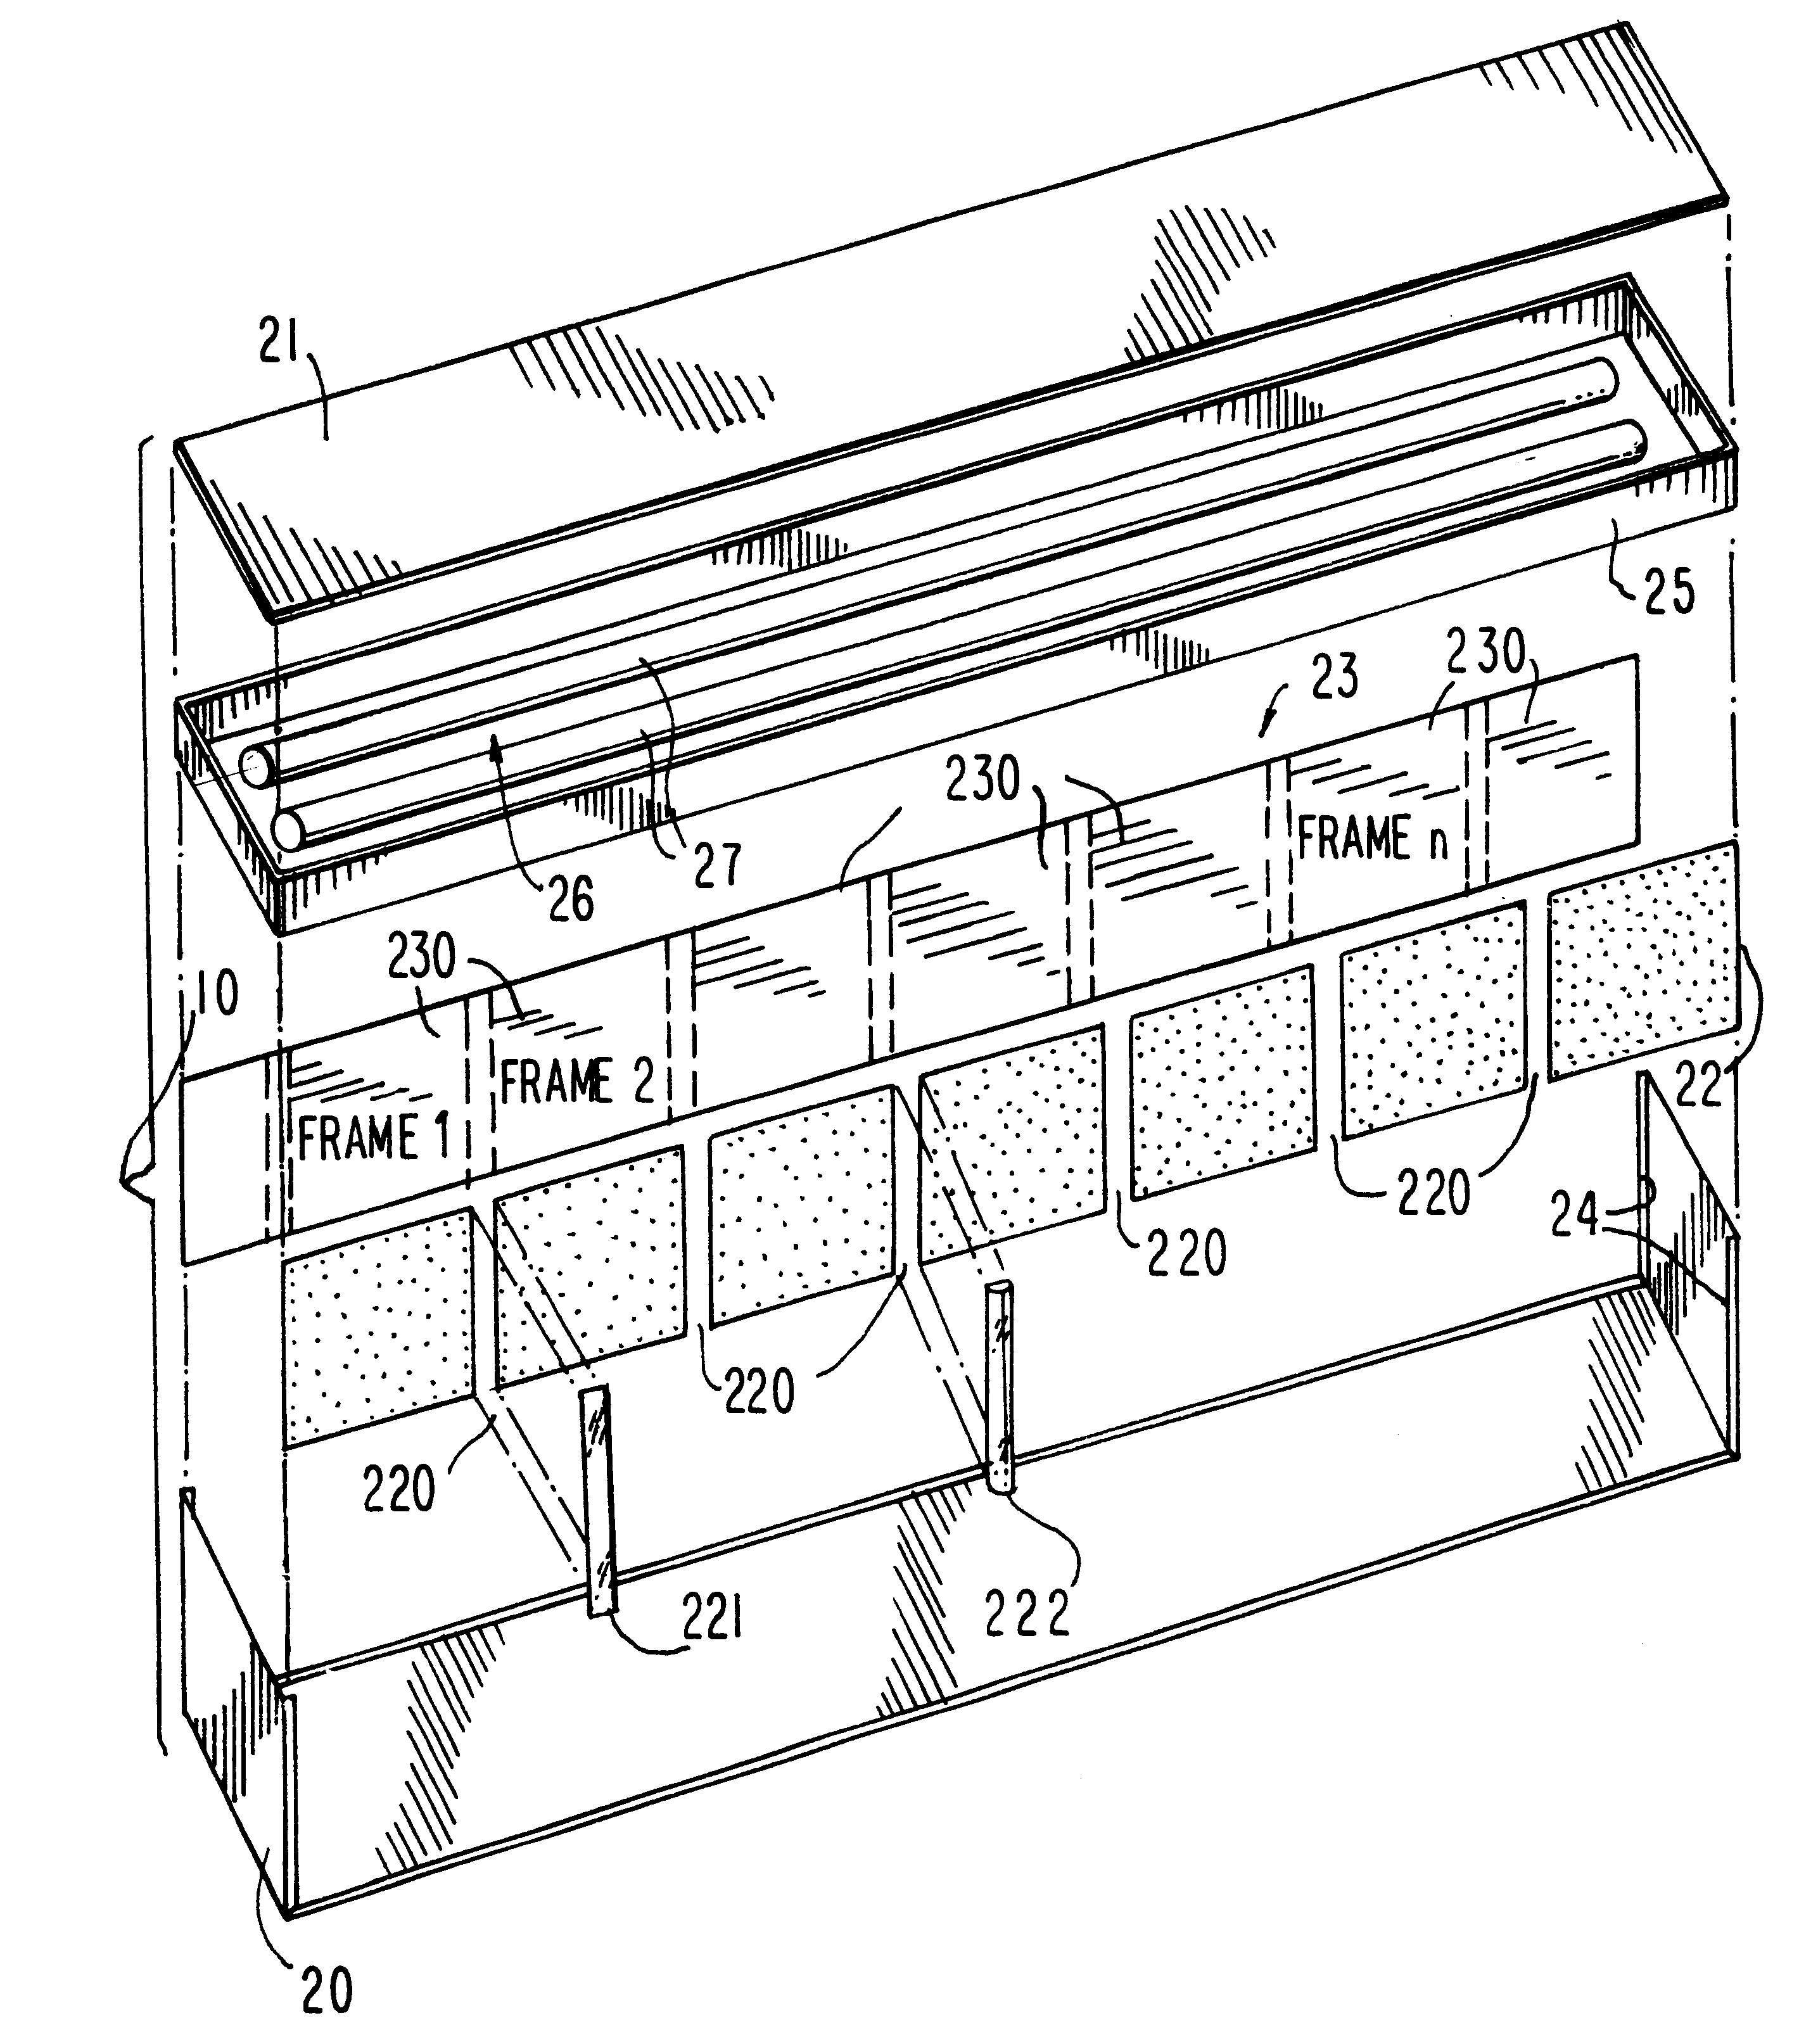 Apparatus for displaying images to viewers in motion